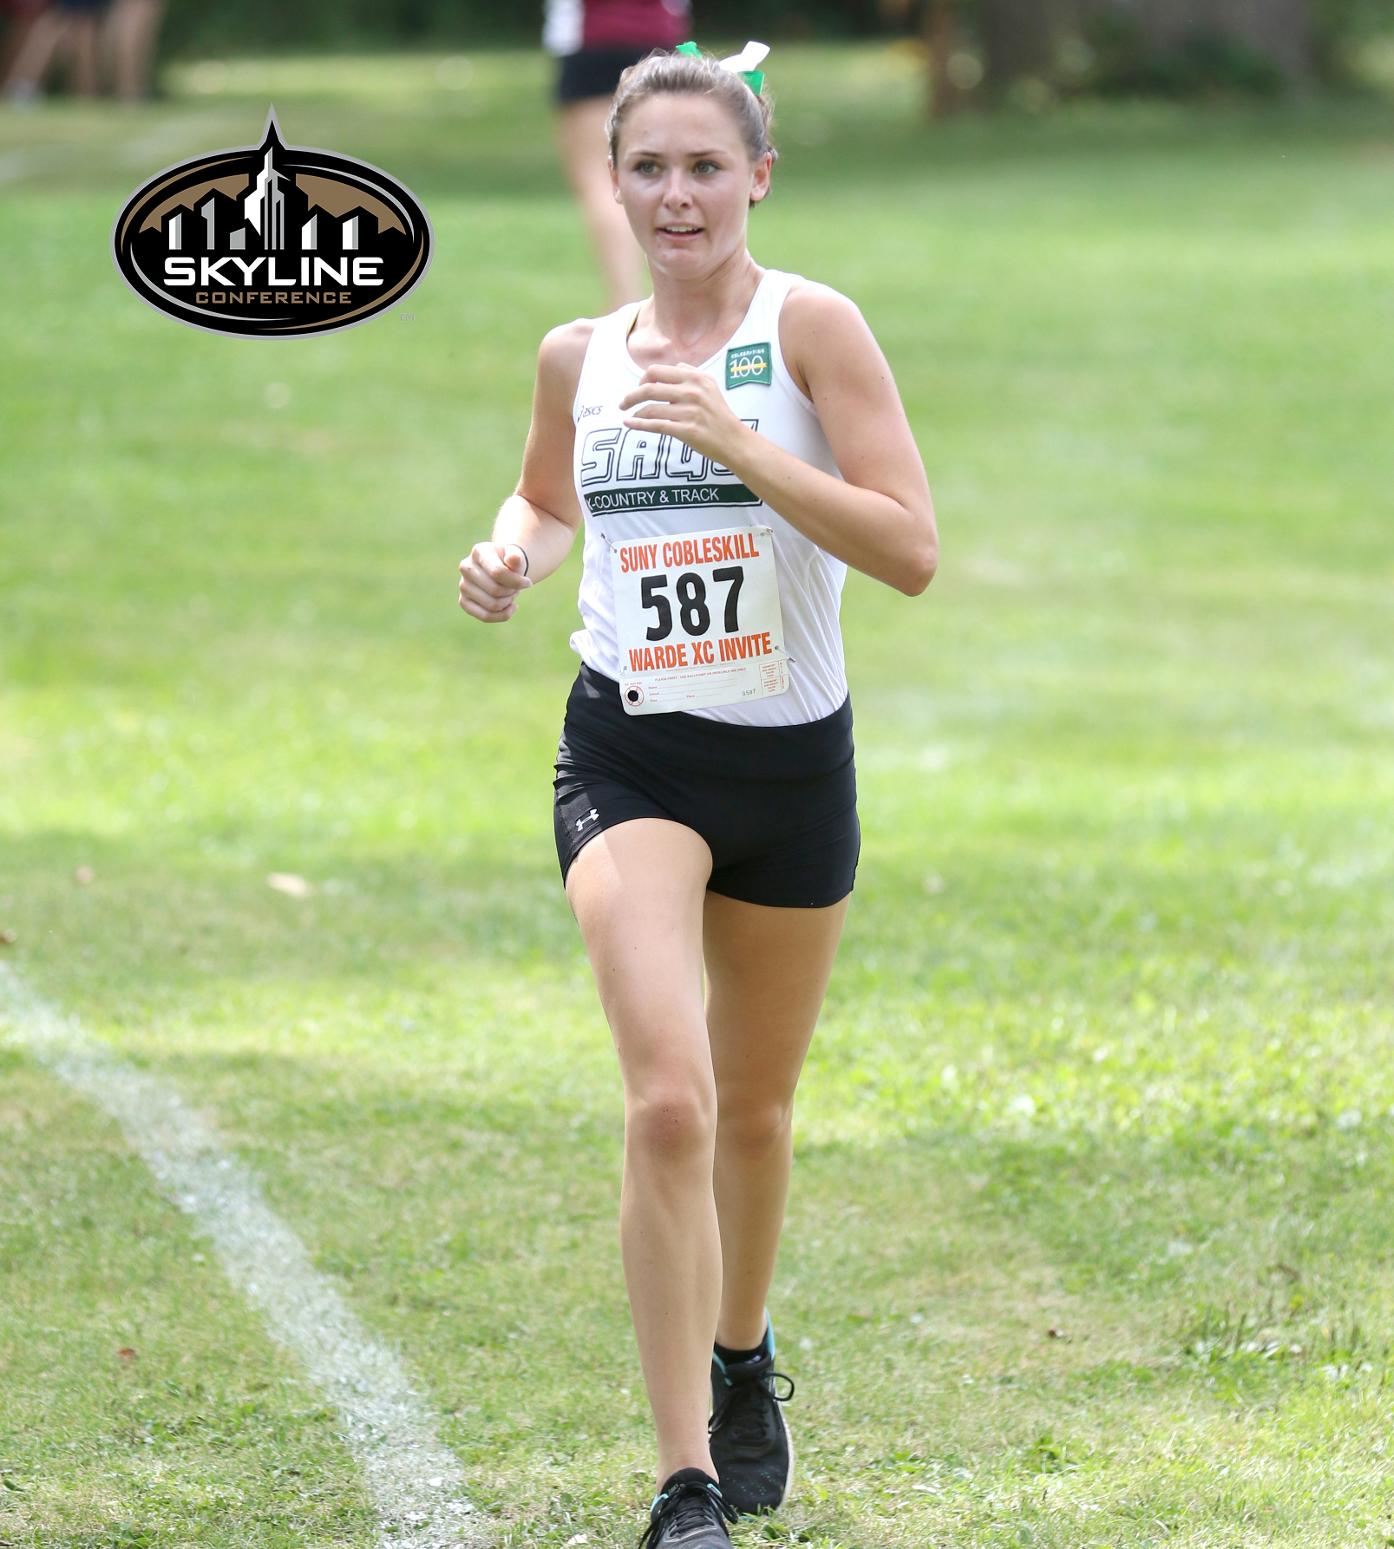 Skyline Taps Farrell as Rookie Runner of the Week again!